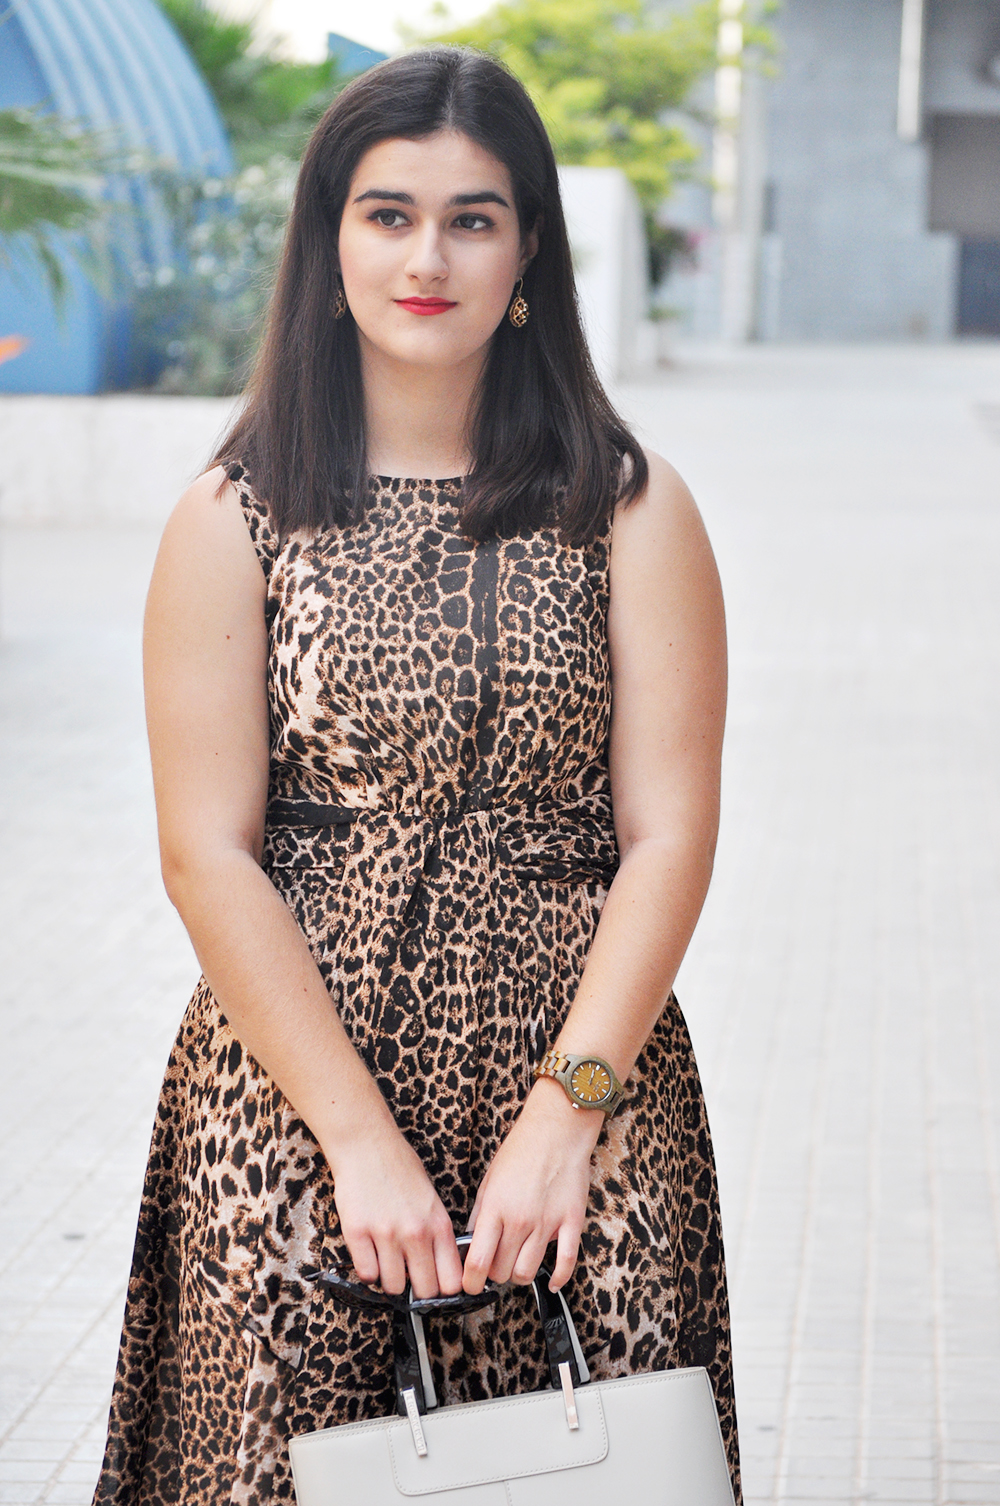 valencia fashion blogger moda, something fashion leopard dress, JORDwatch wooden watch sunglasses streetstyle outfit, stonefly lamarthe bag, how to wear leopard print dress